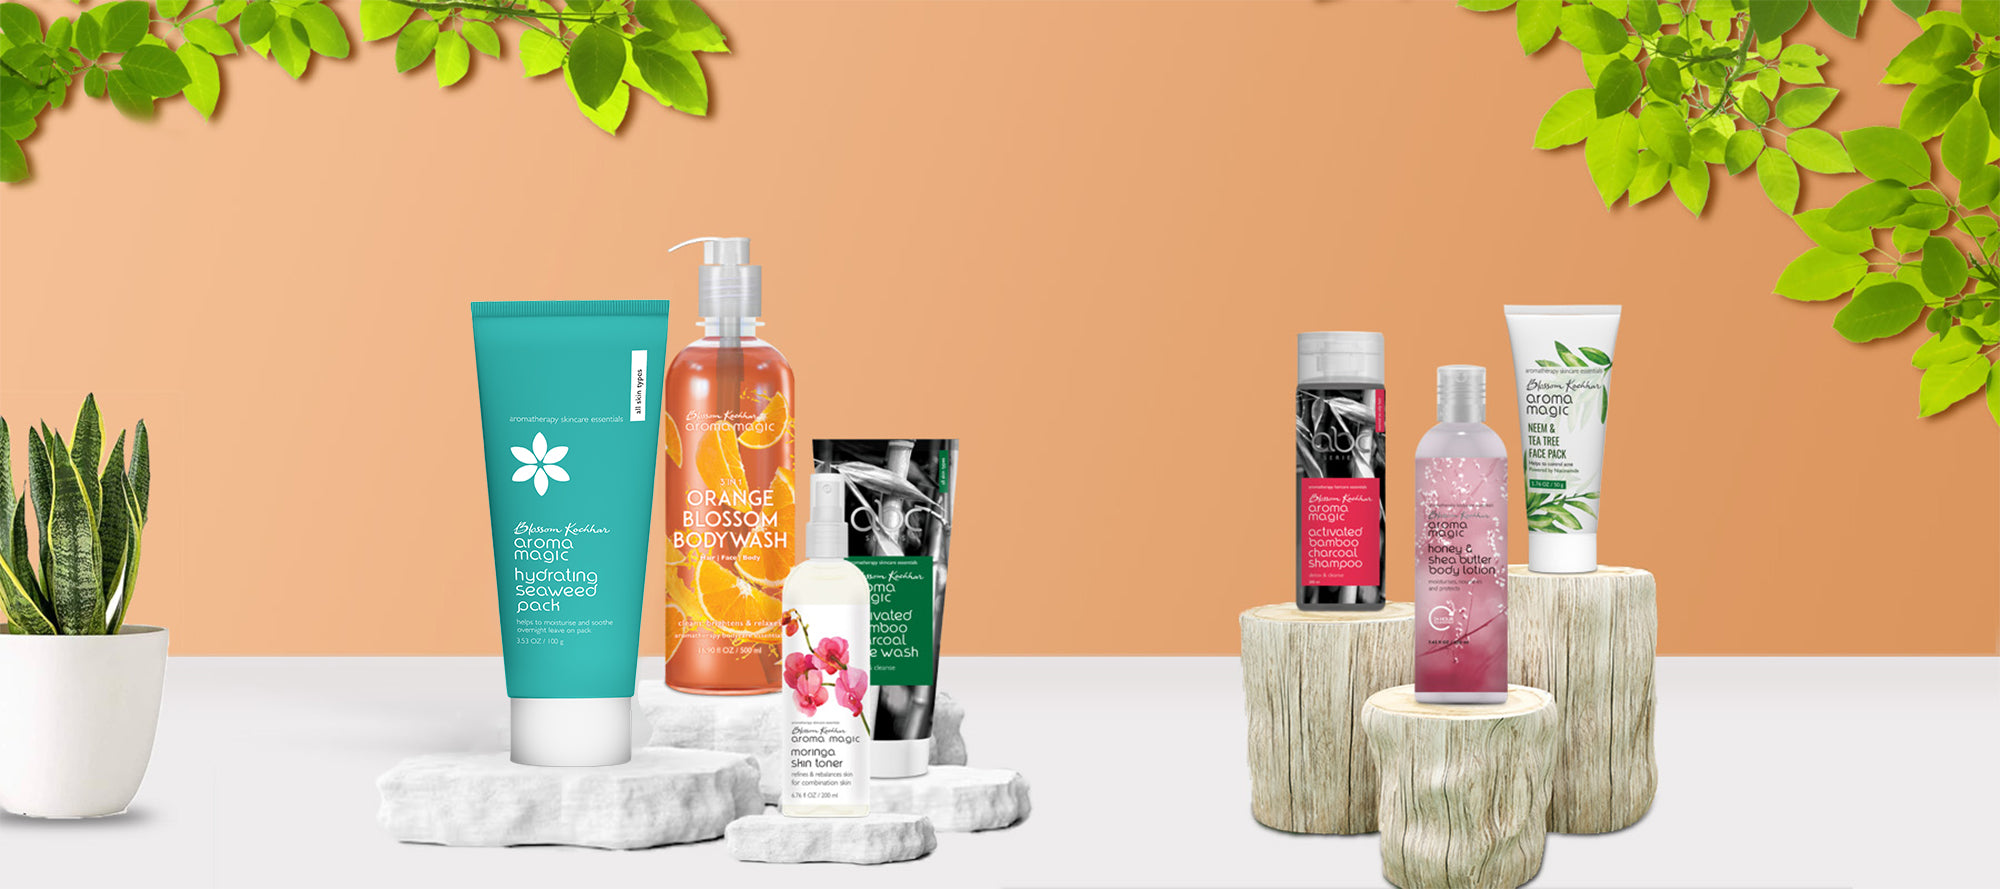 BENEFIT is going GREEN. How about combining beauty with nature